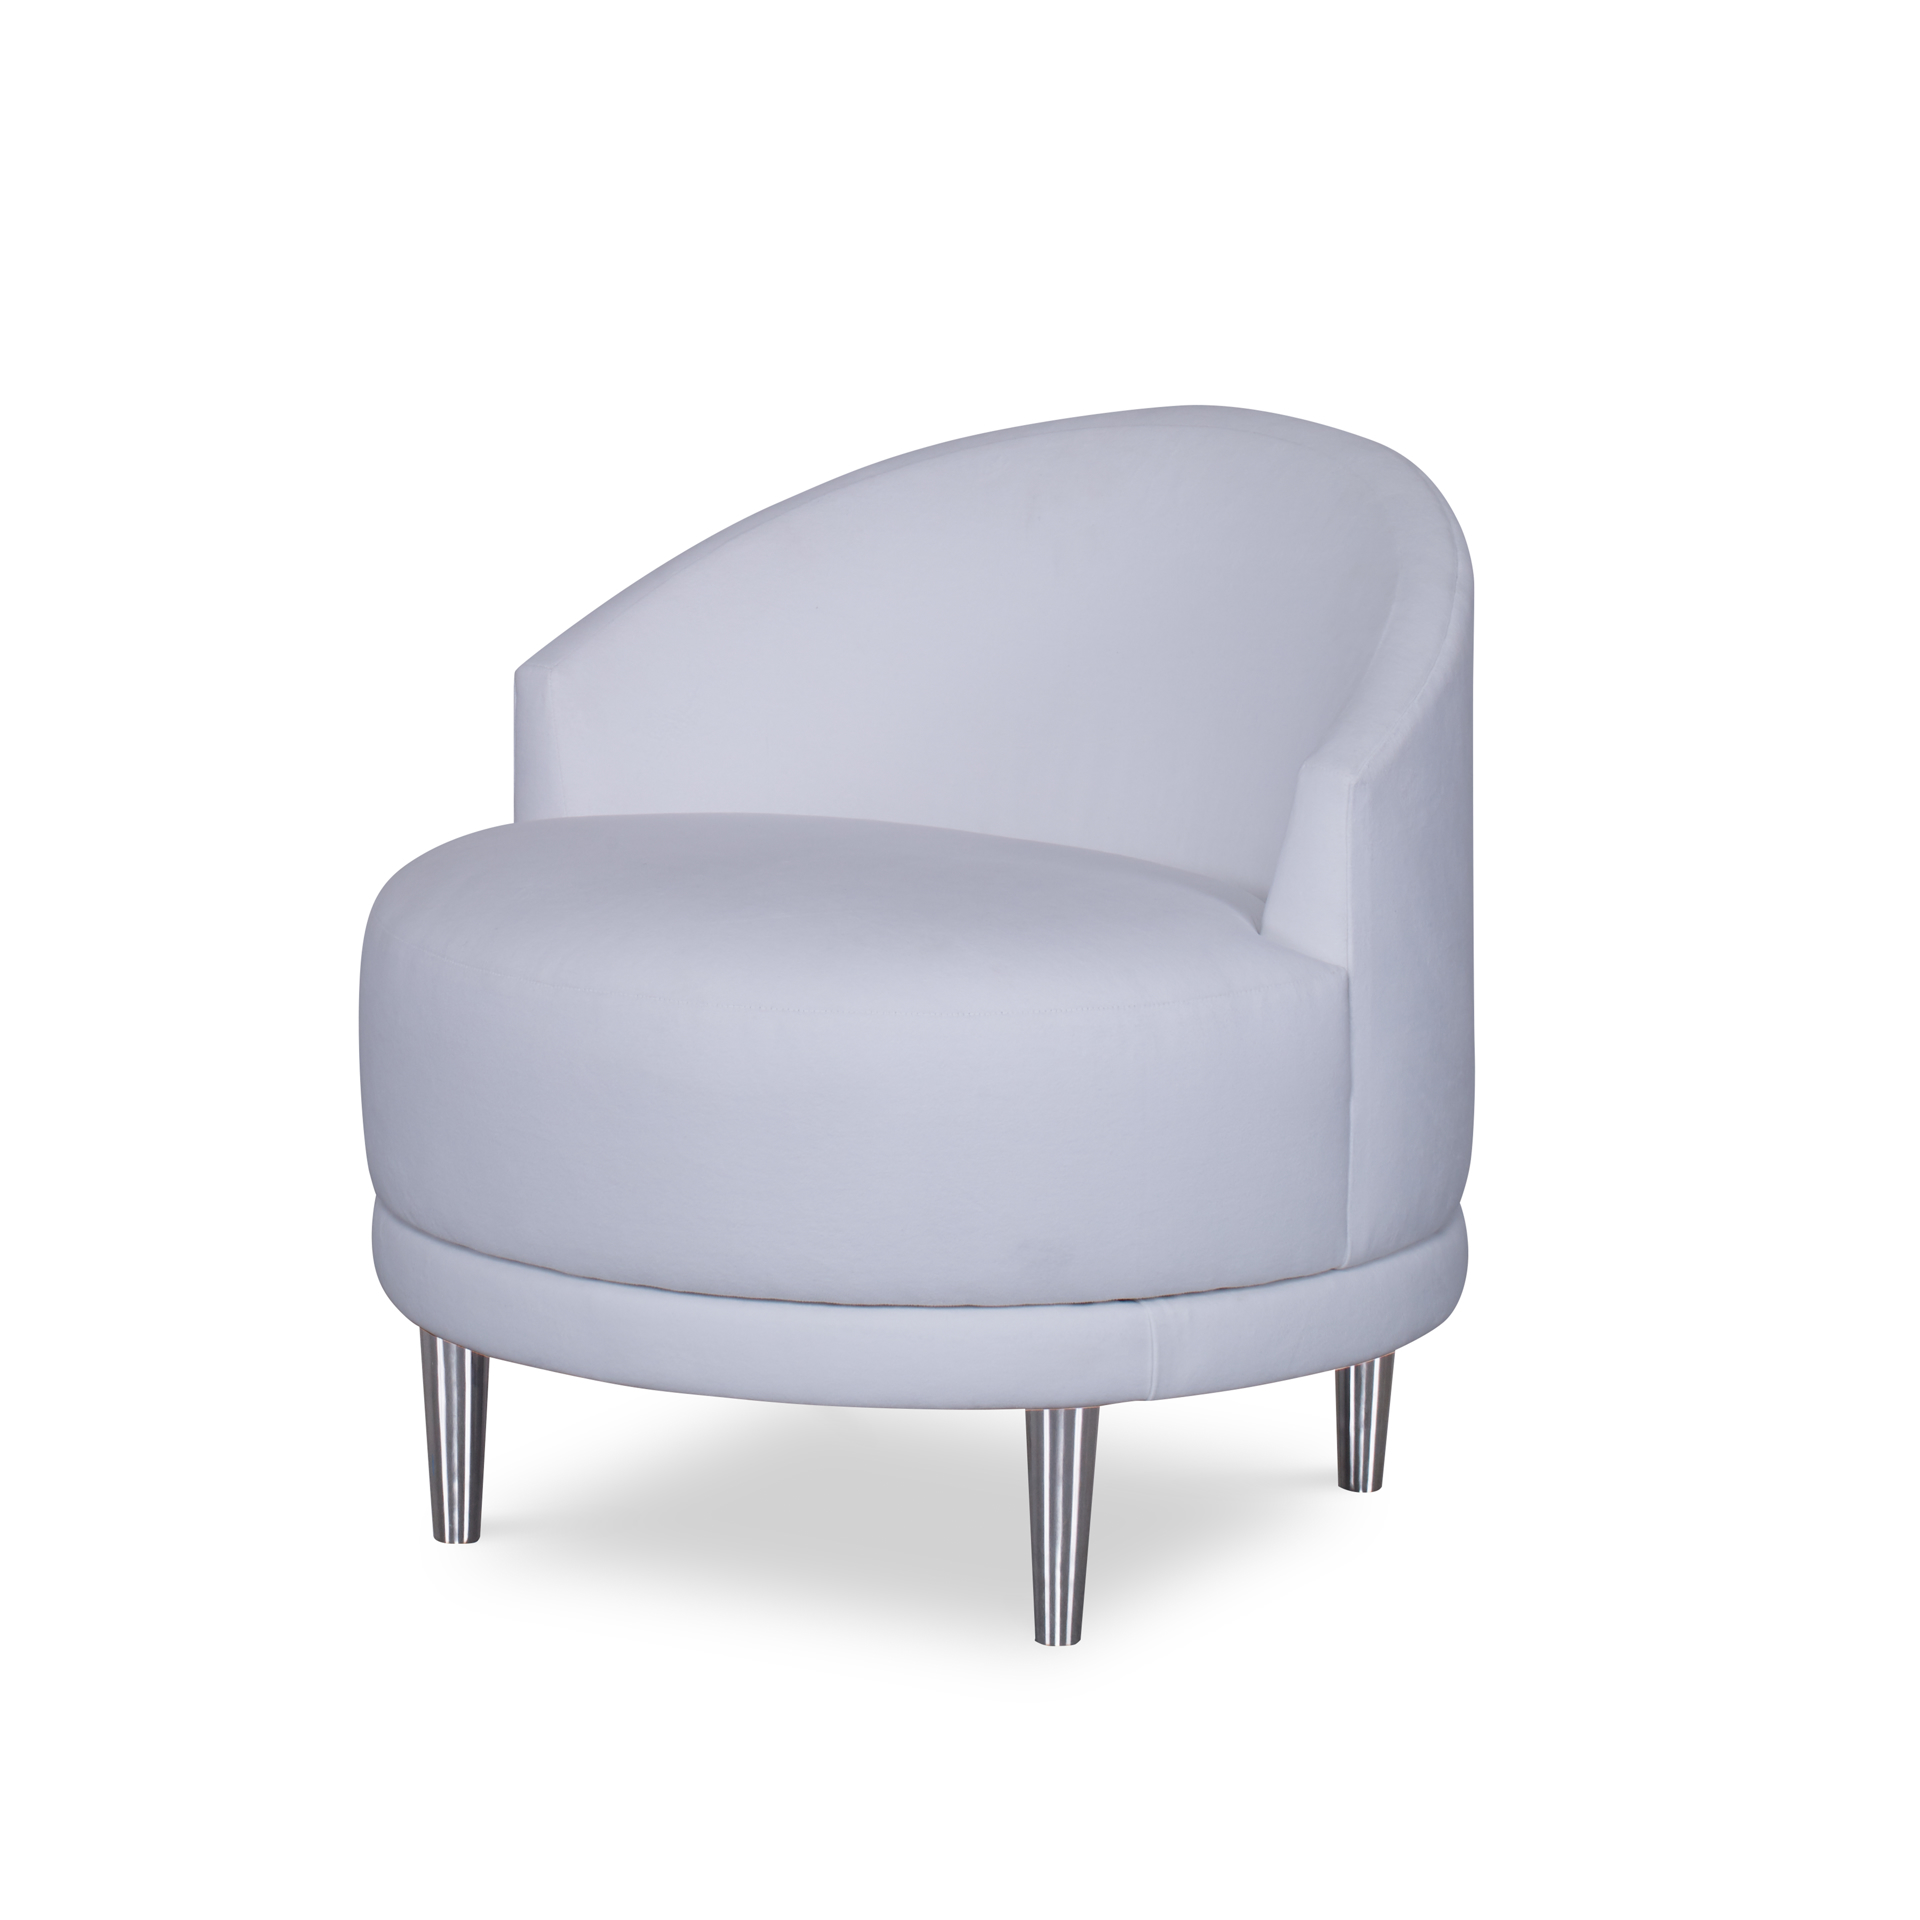 BELIZE ARMLESS SWIVEL CHAIR - PLATINUM COLLECTION